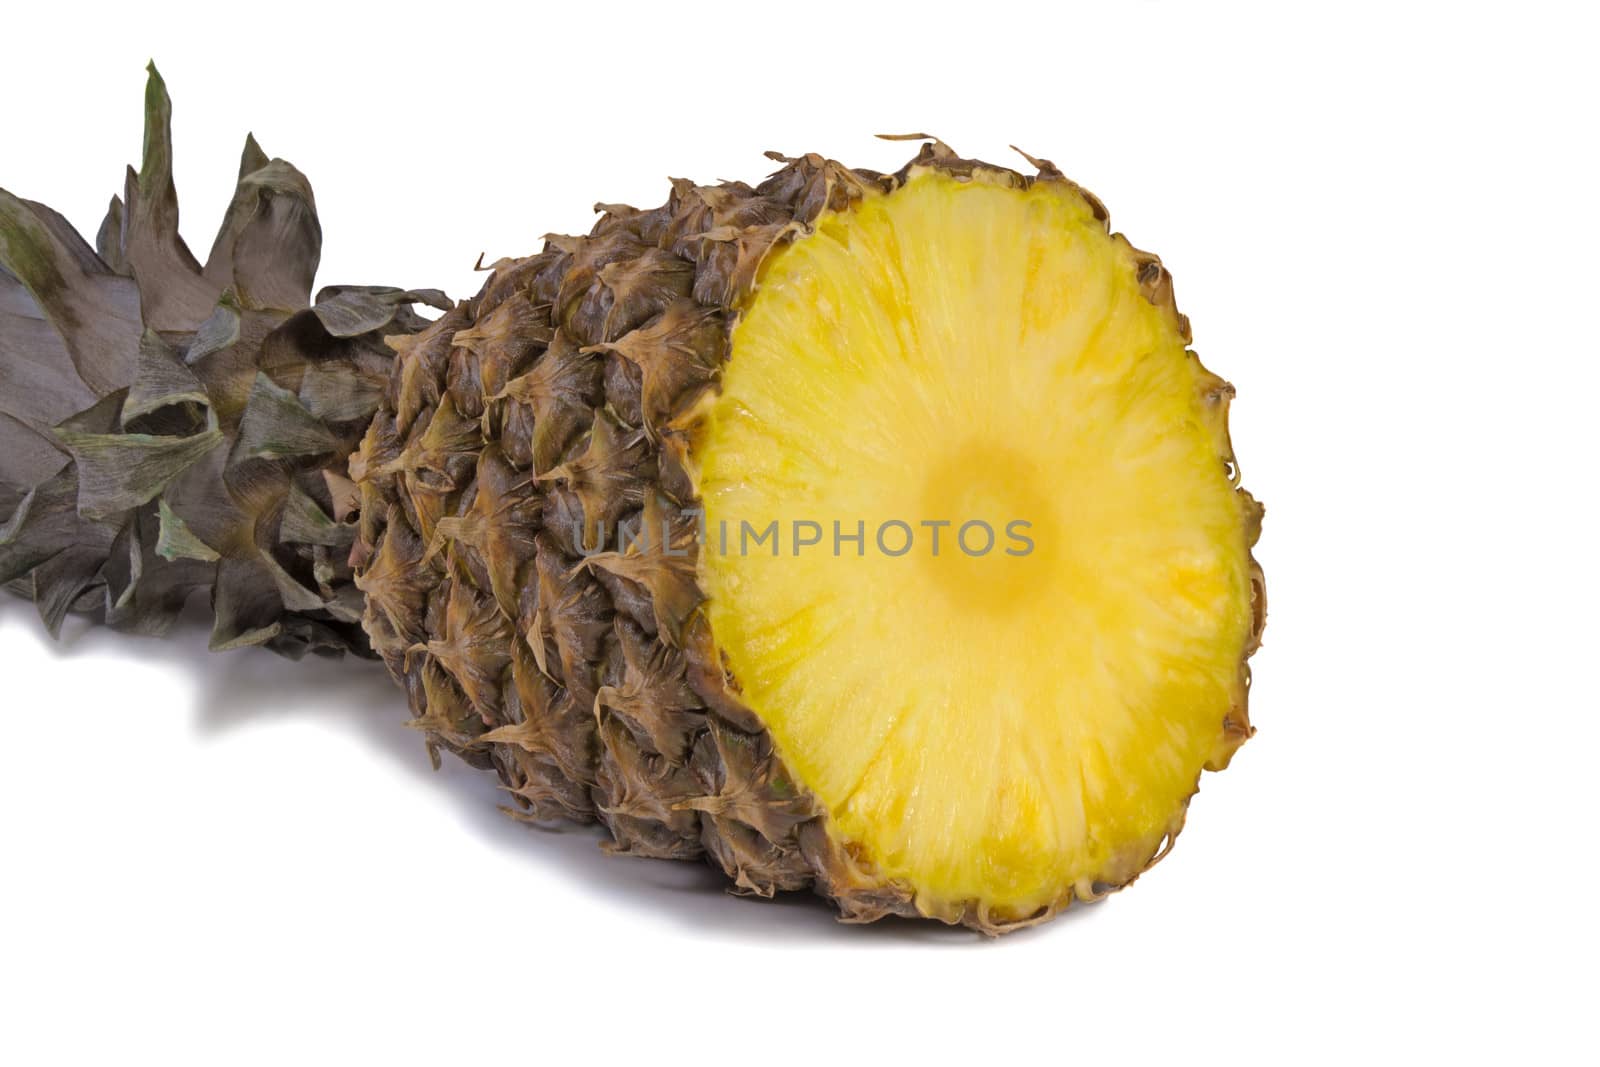 Cut in half pineapple leaves. Presented on a white background.
.